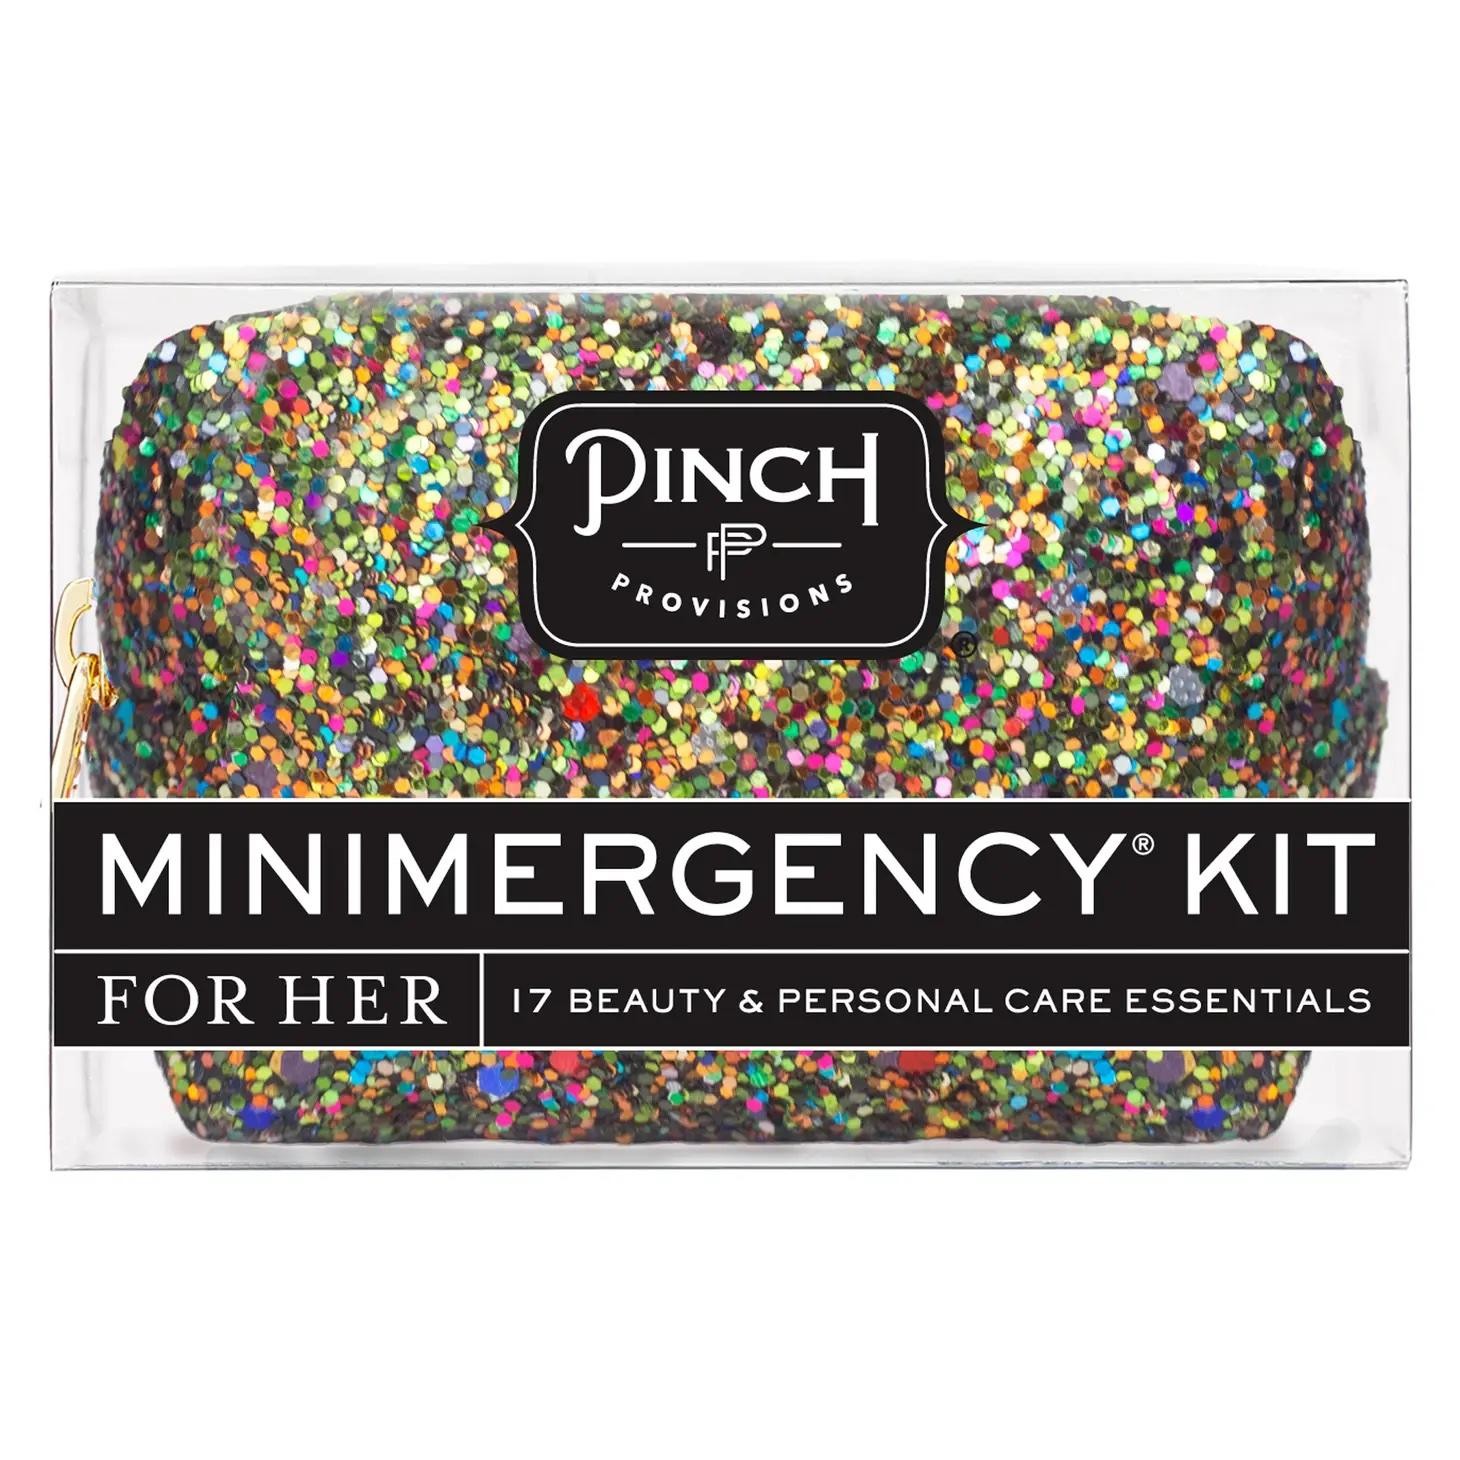 Minimergency Kit for the M.O.G. – Pinch Provisions